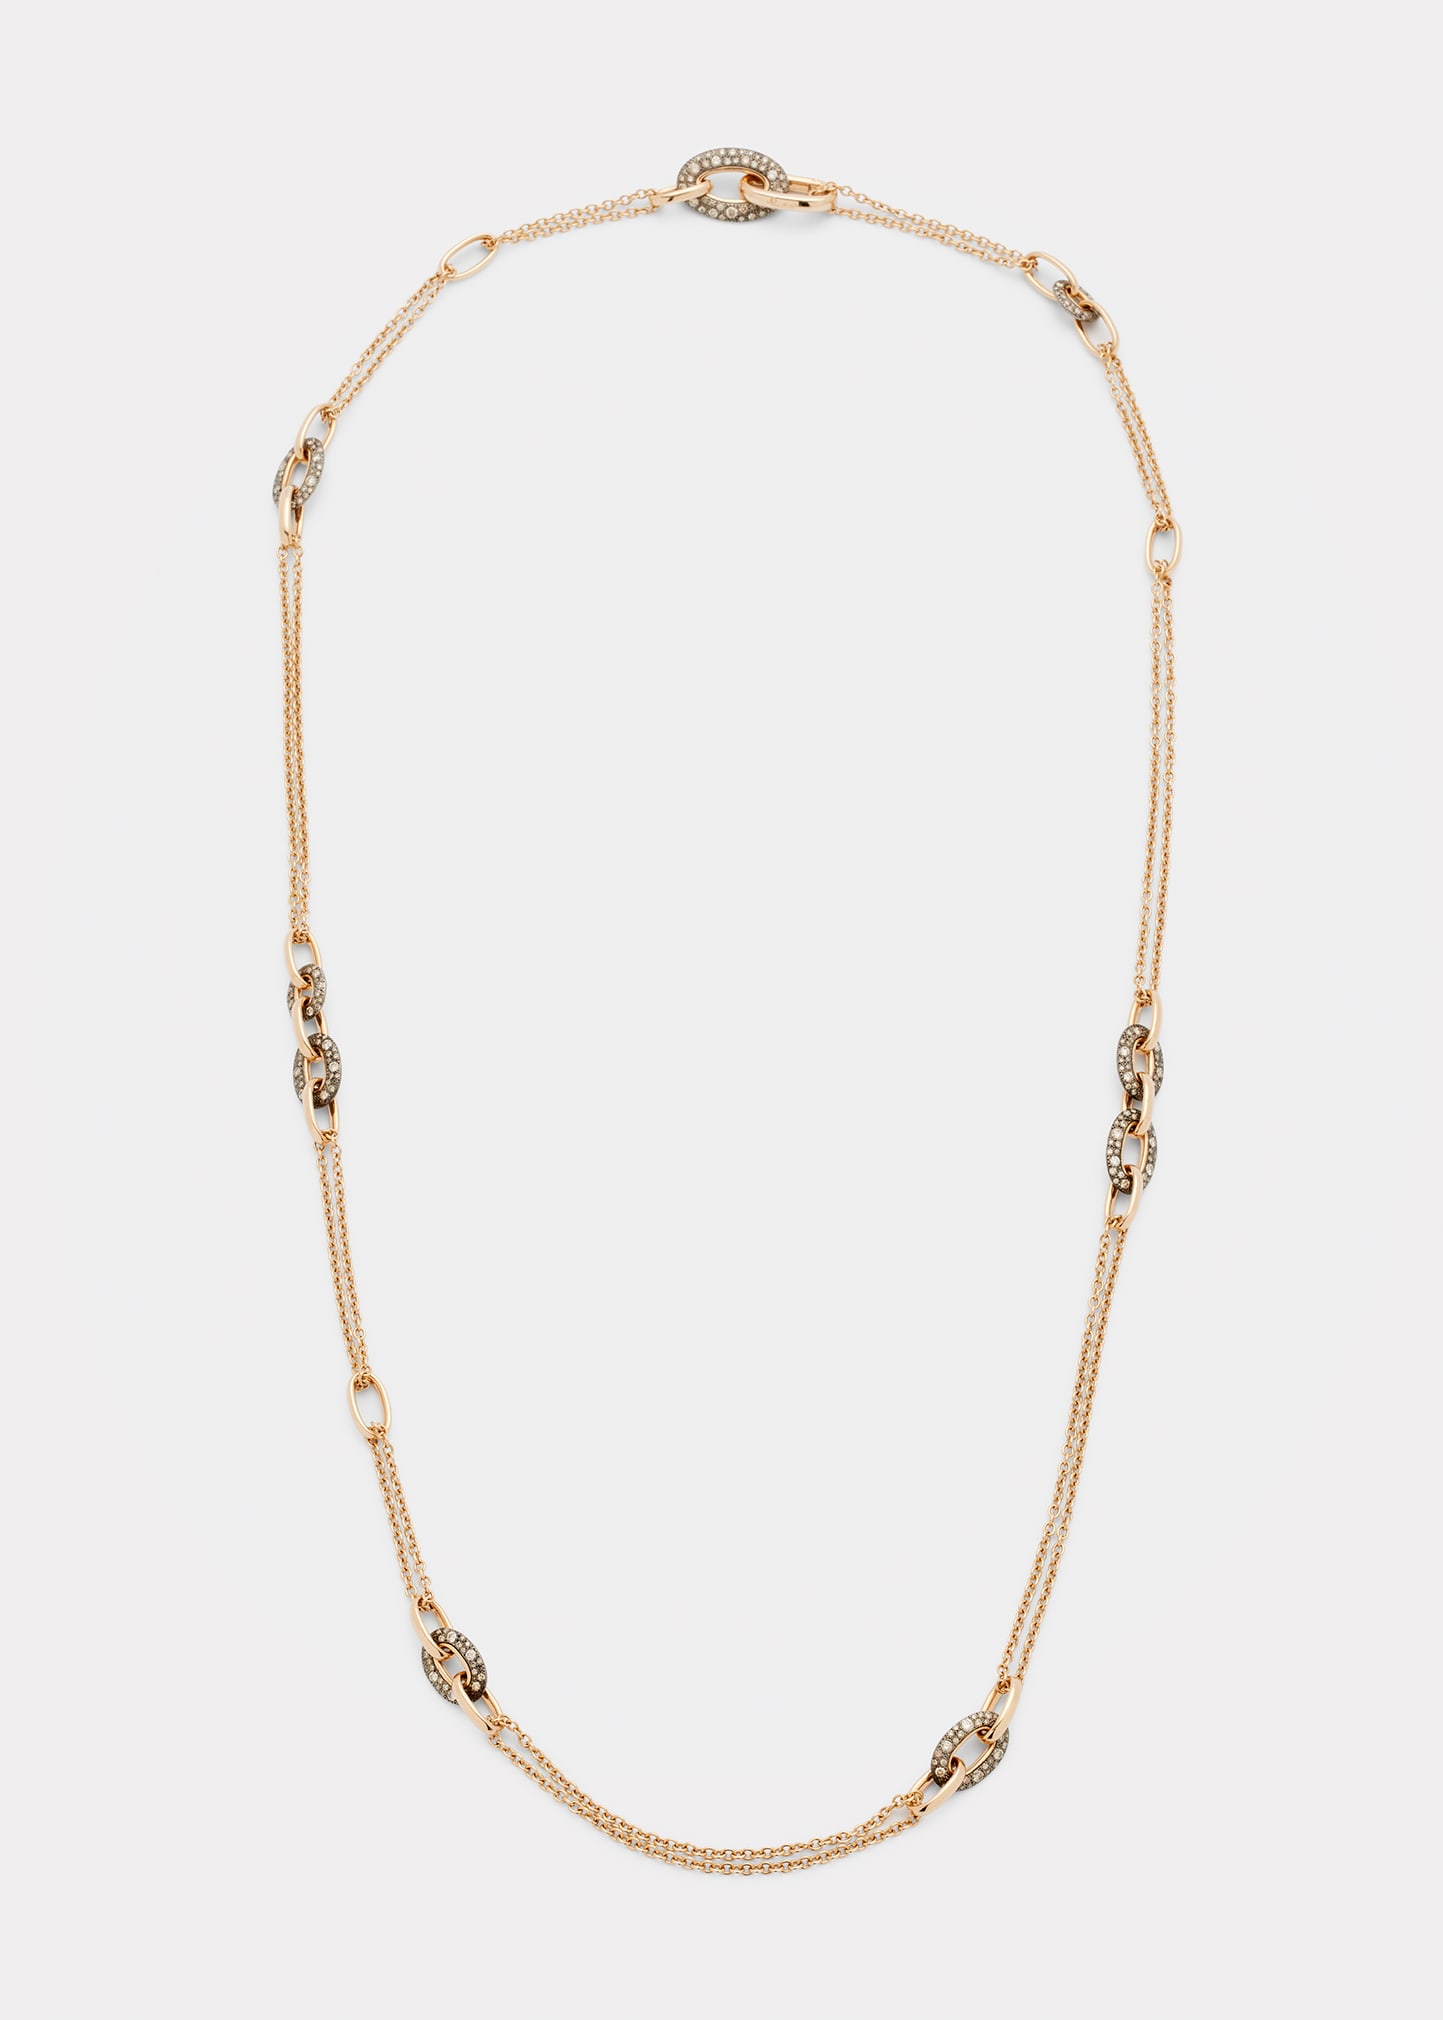 Tango 18k Rose Gold Chain Necklace with Brown Diamonds